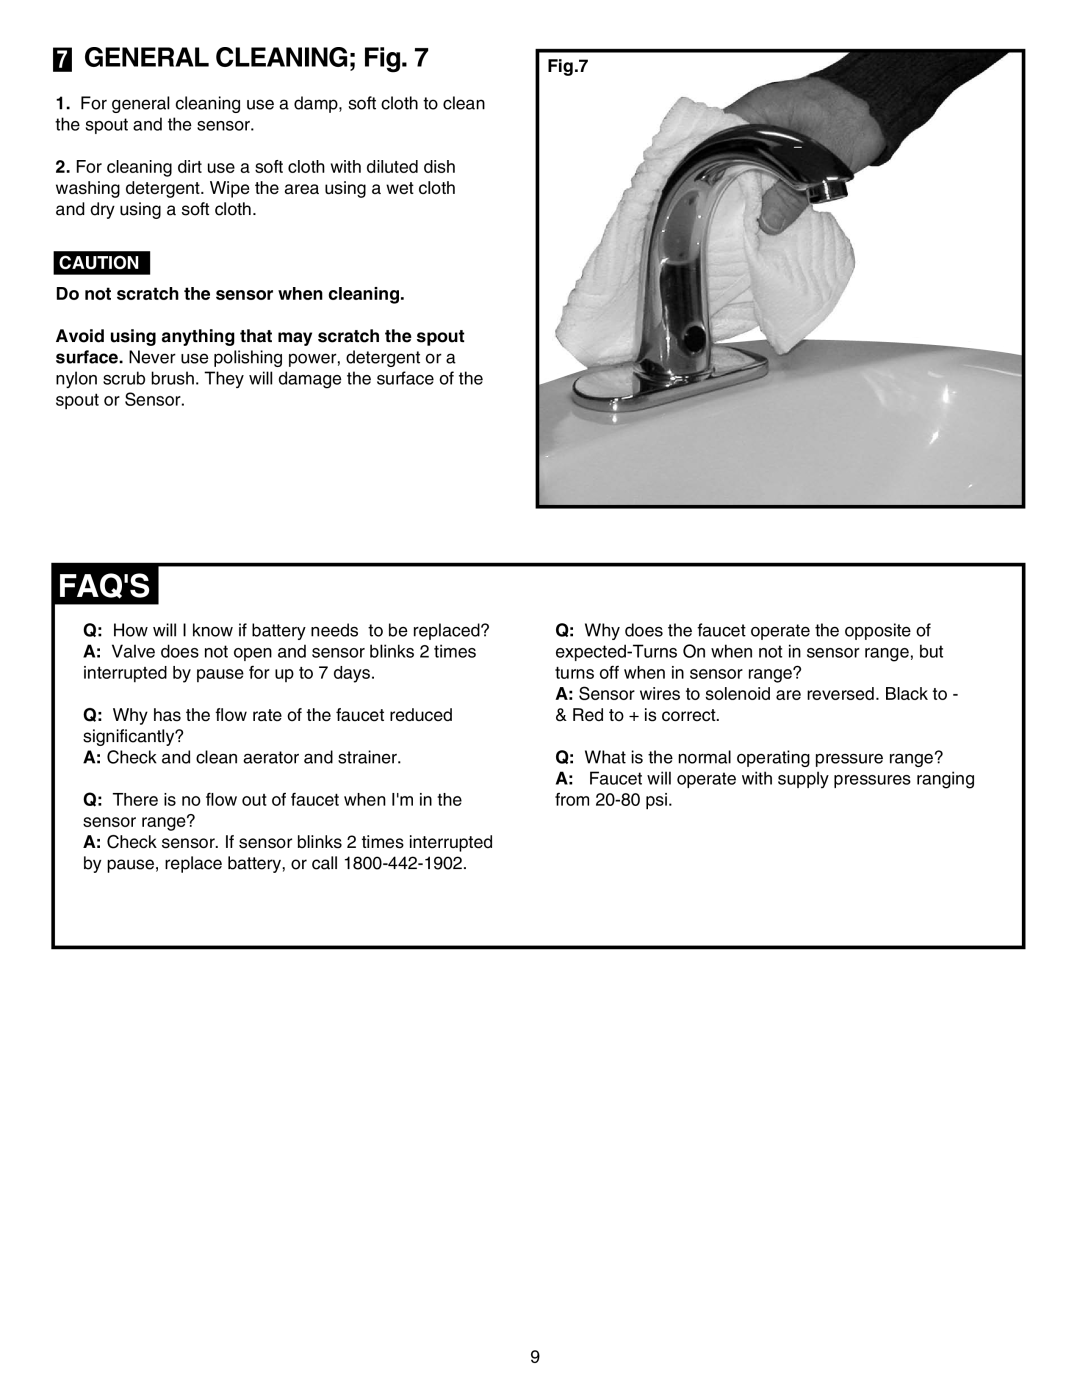 American Standard Proximity Faucet Faqs, GENERAL CLEANING Fig, Do not scratch the sensor when cleaning 